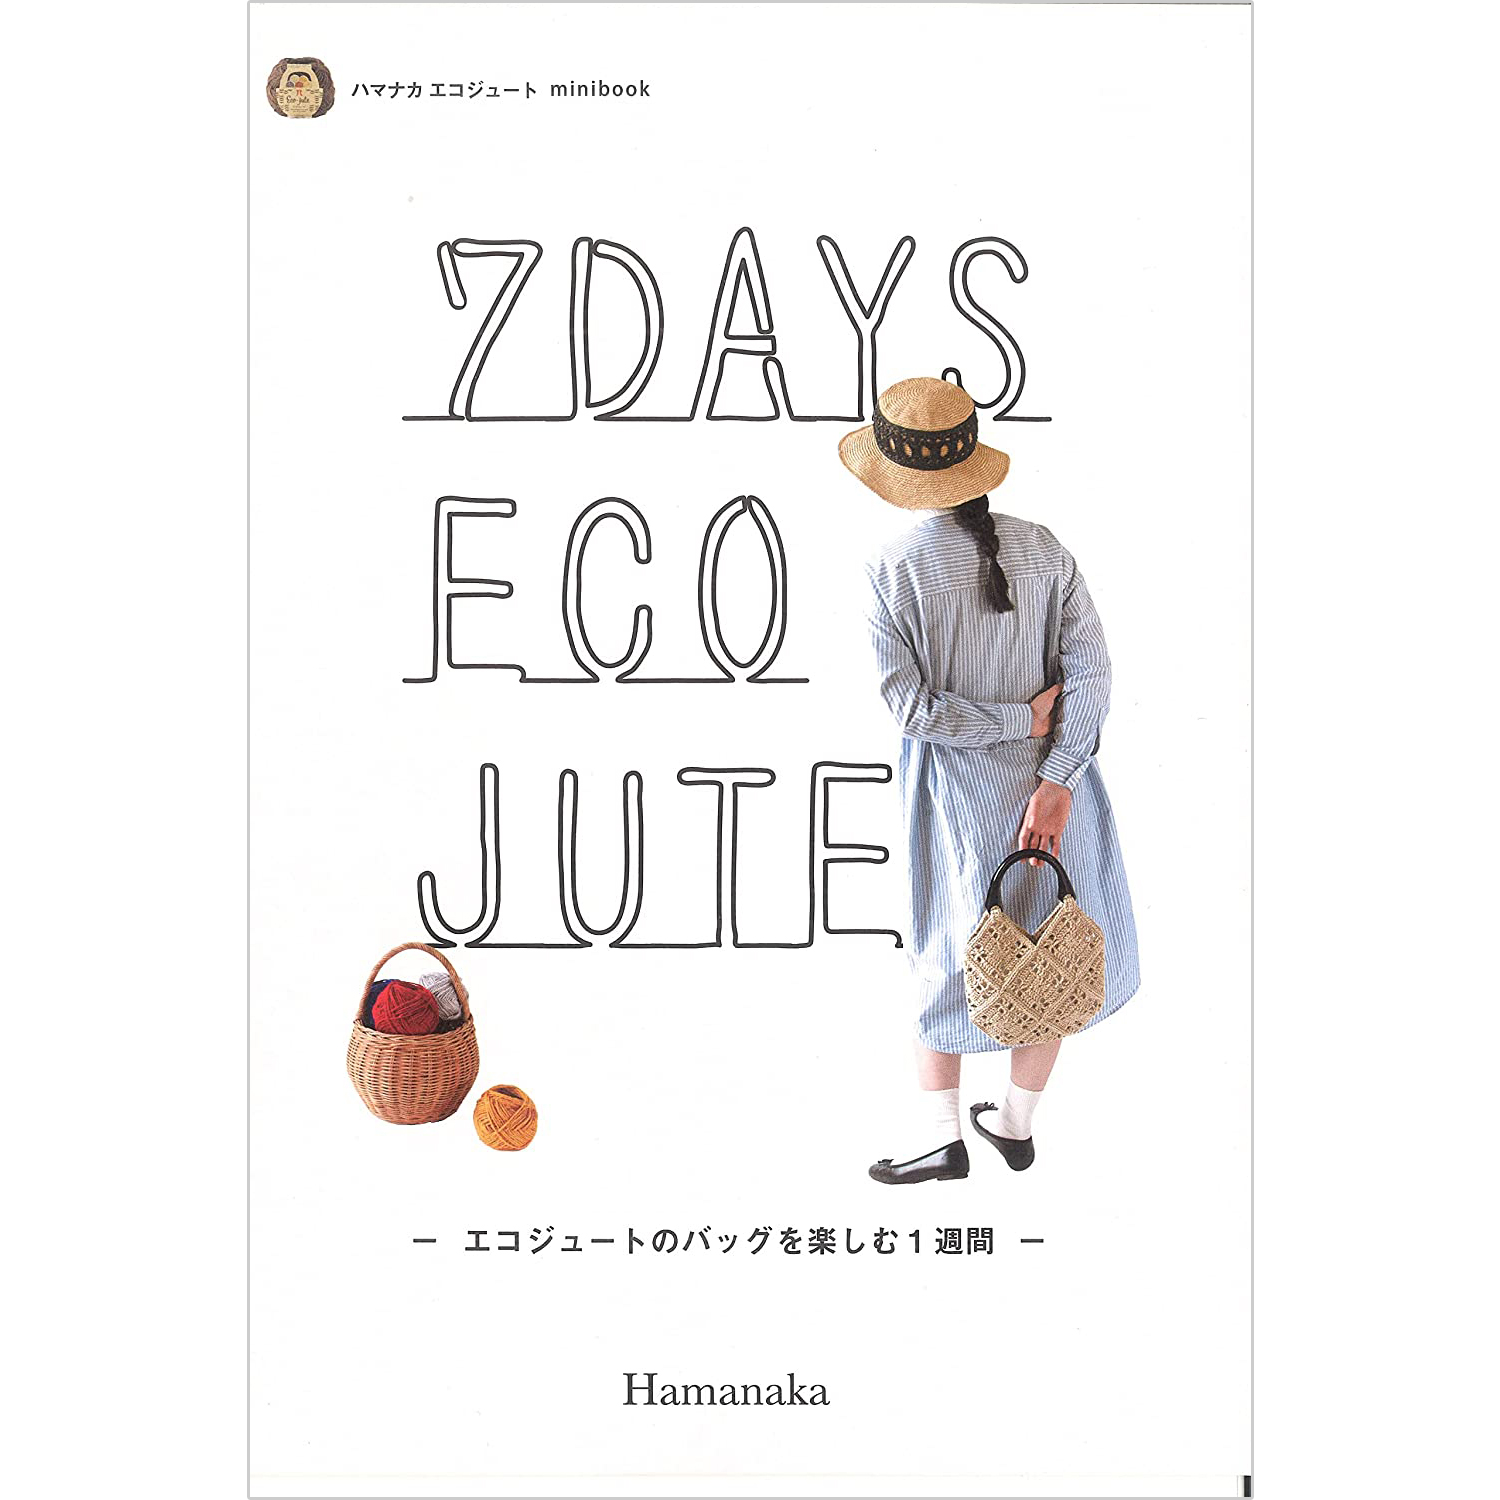 H103-260 Works 7DAYS ECO JUTE A week to enjoy eco jute bags (book)